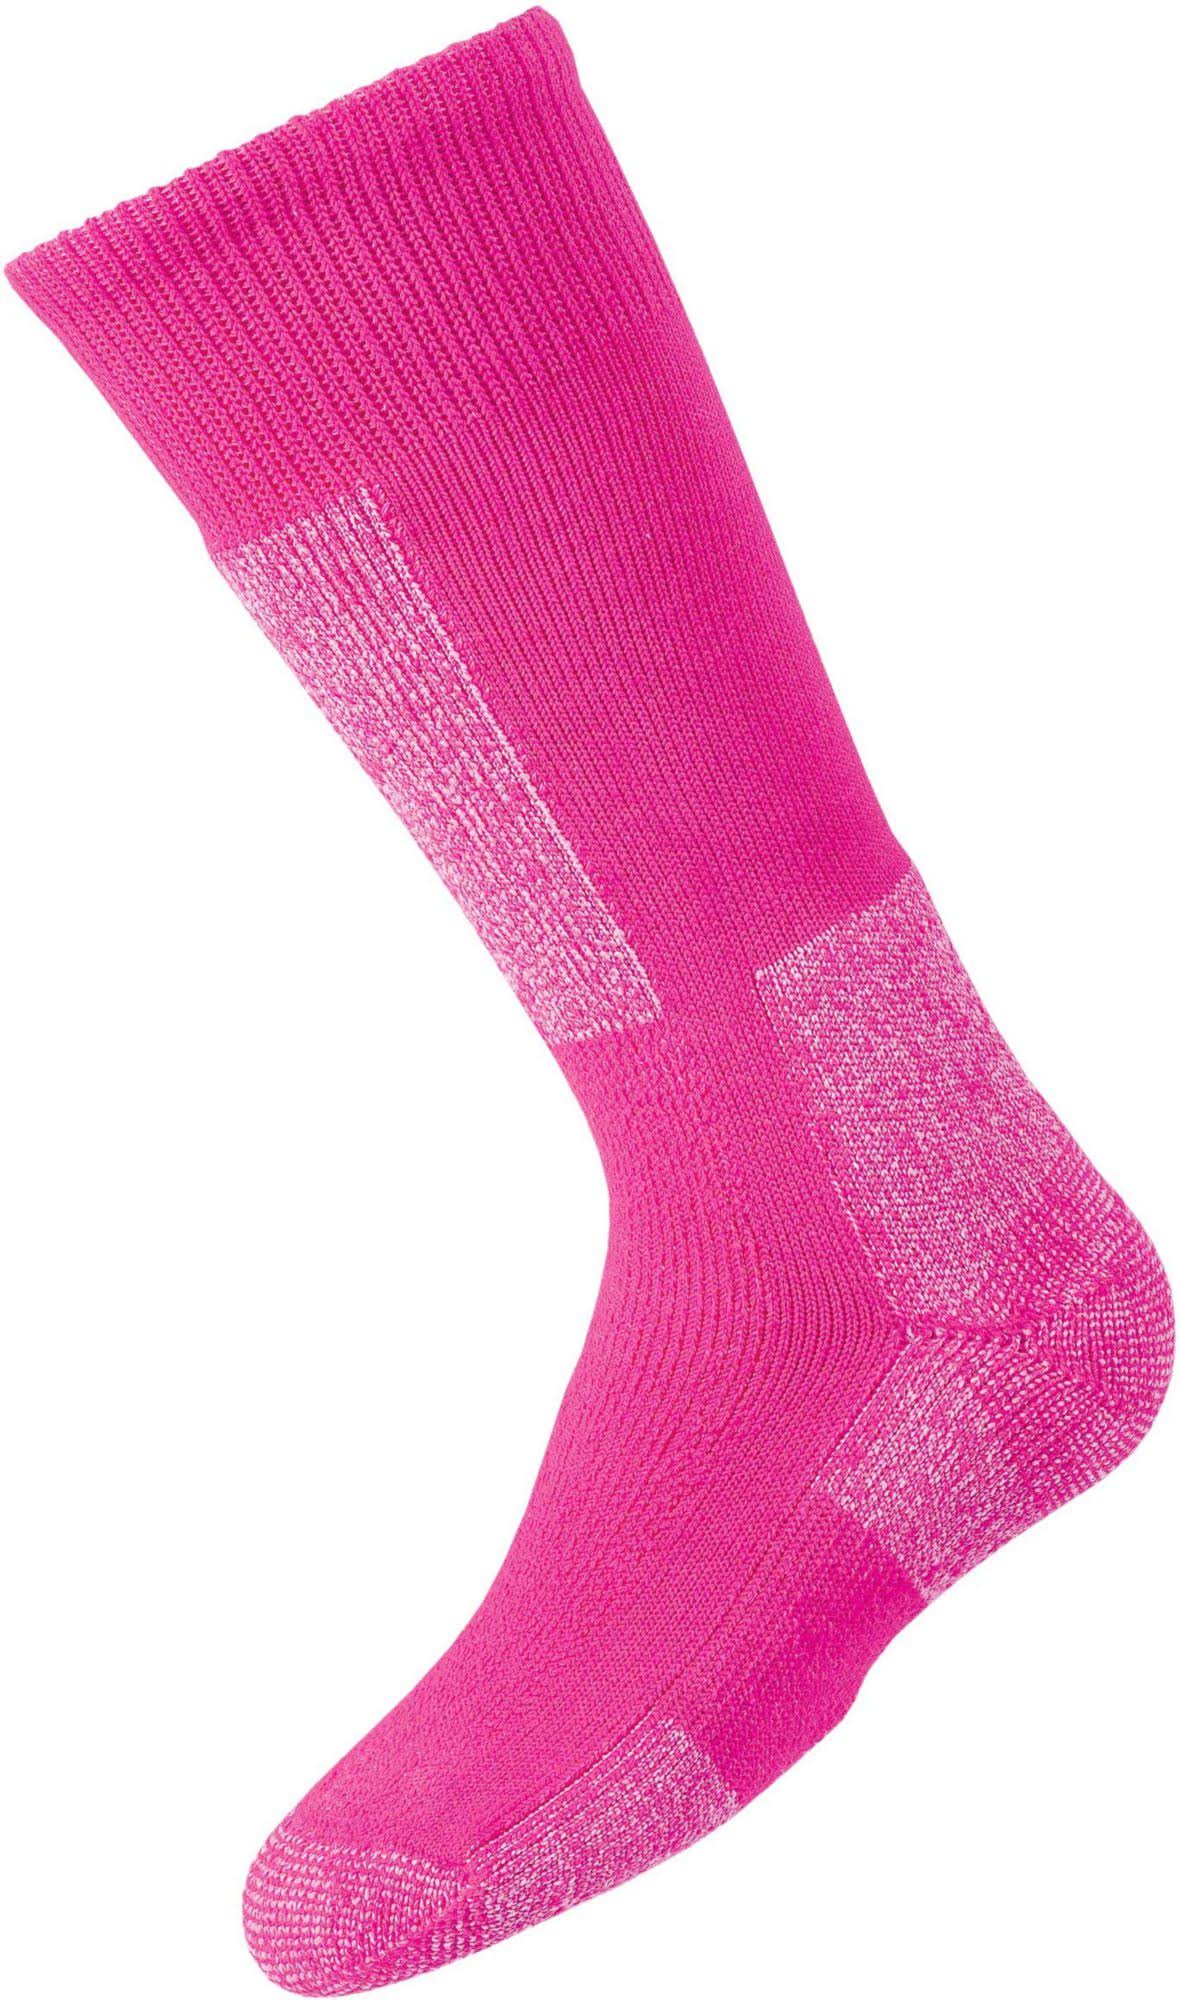 Thorlos Moderate Padded Over the Calf Snow Socks - Pink, Small